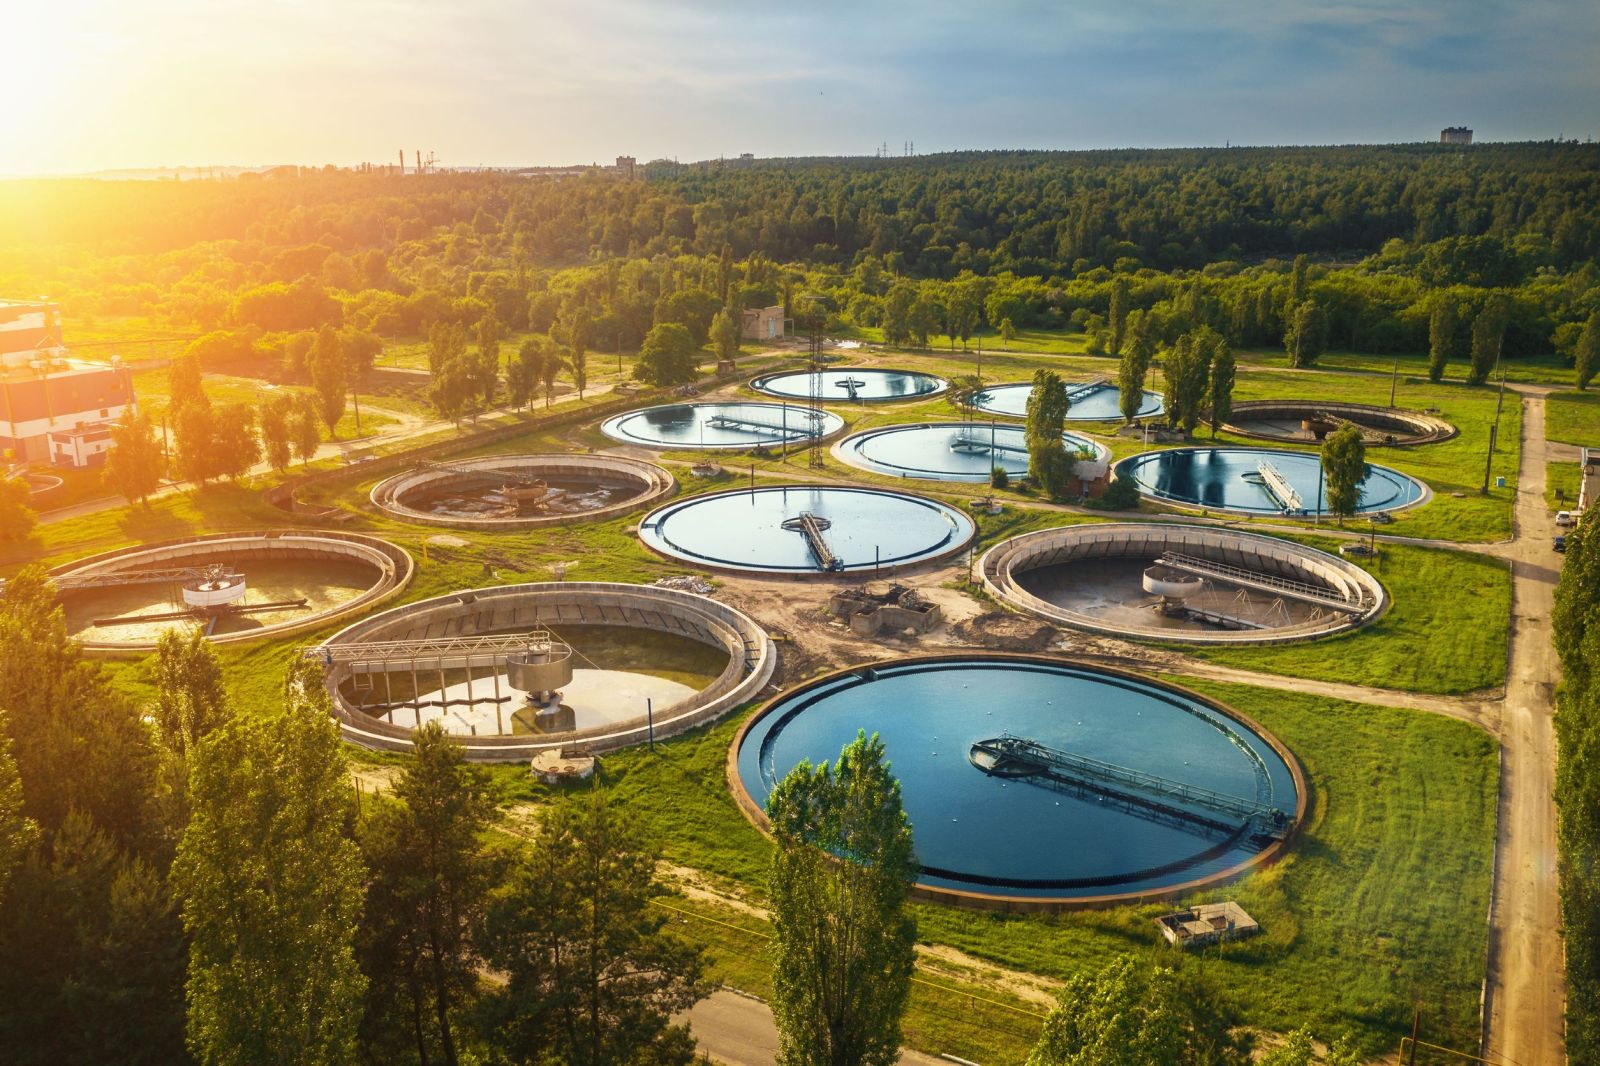 Towards a Healthier Europe: European Commission Proposes Stronger Rules on Pollution – Including Urban Wastewater